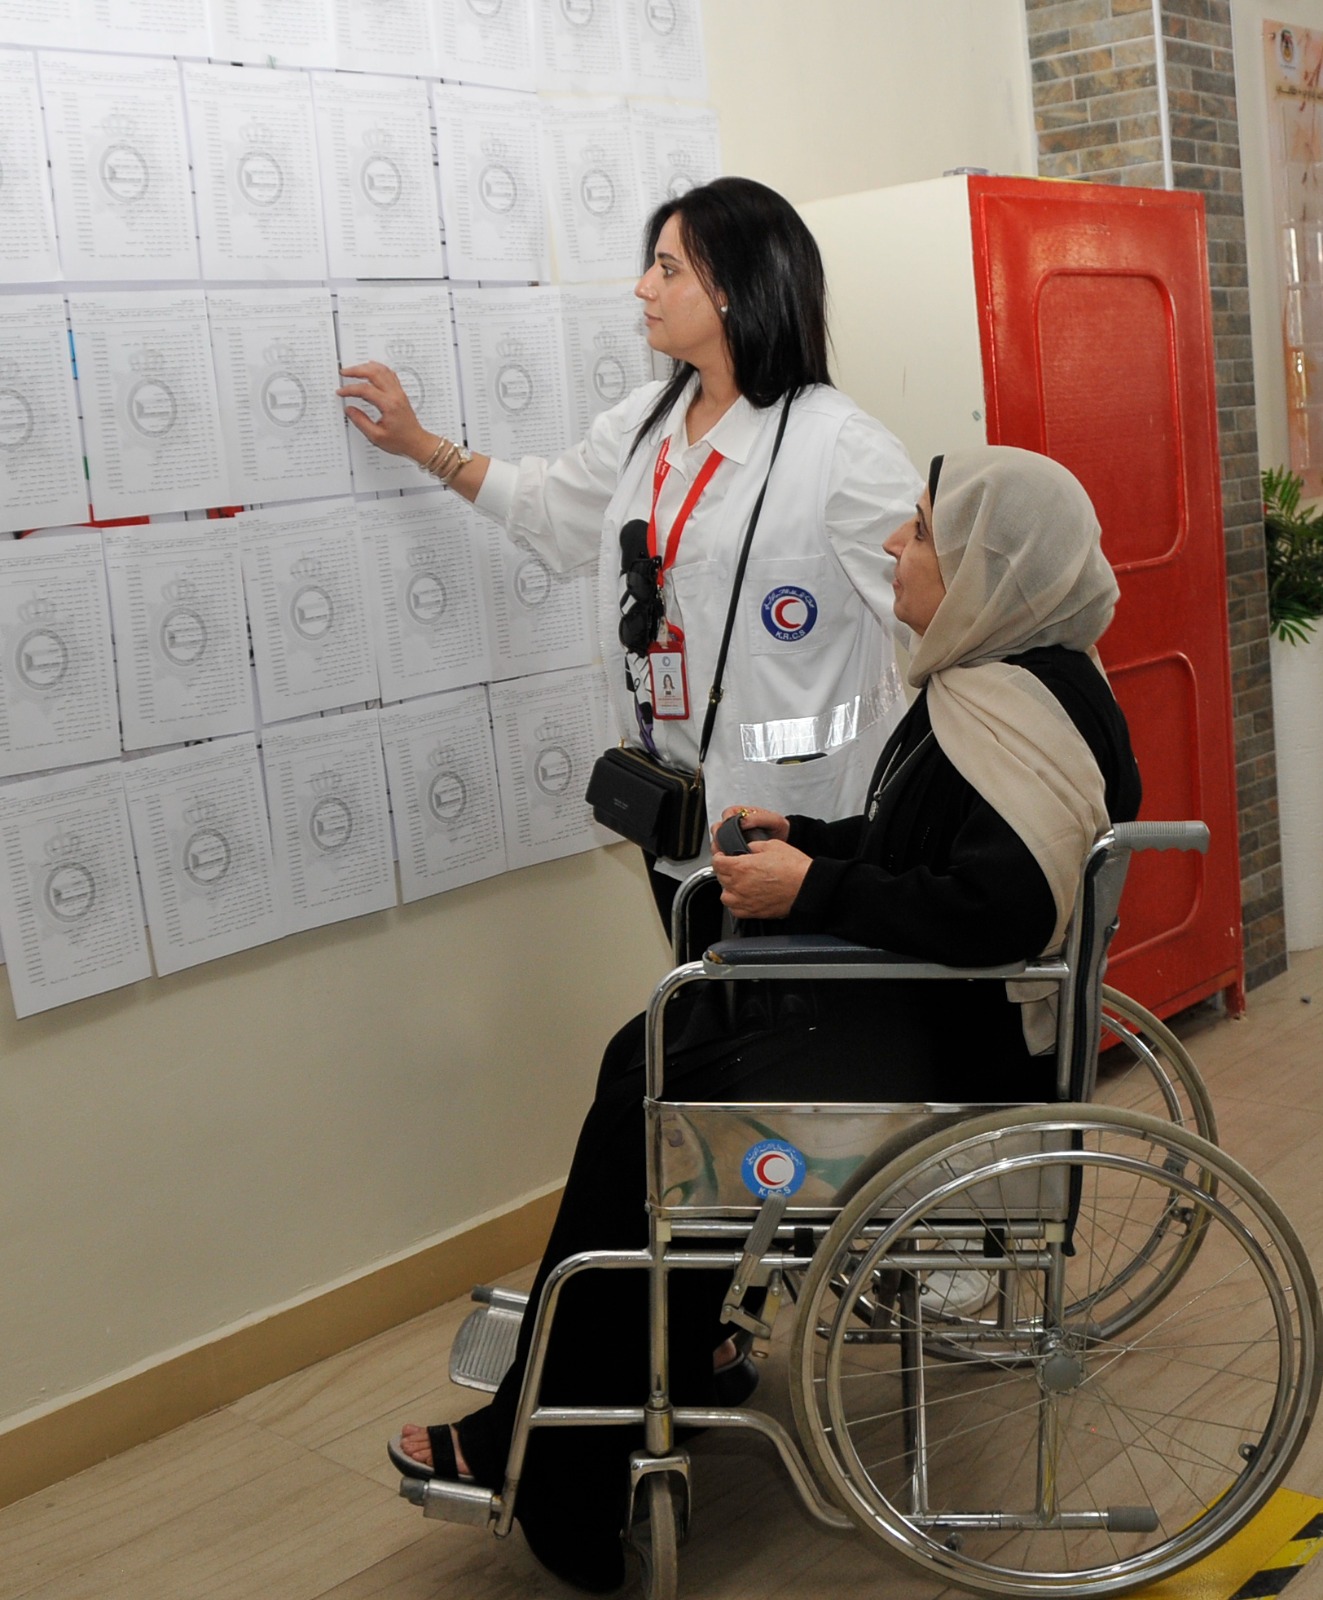 Kuwait Red Crescent Society (KRCS) volunteers